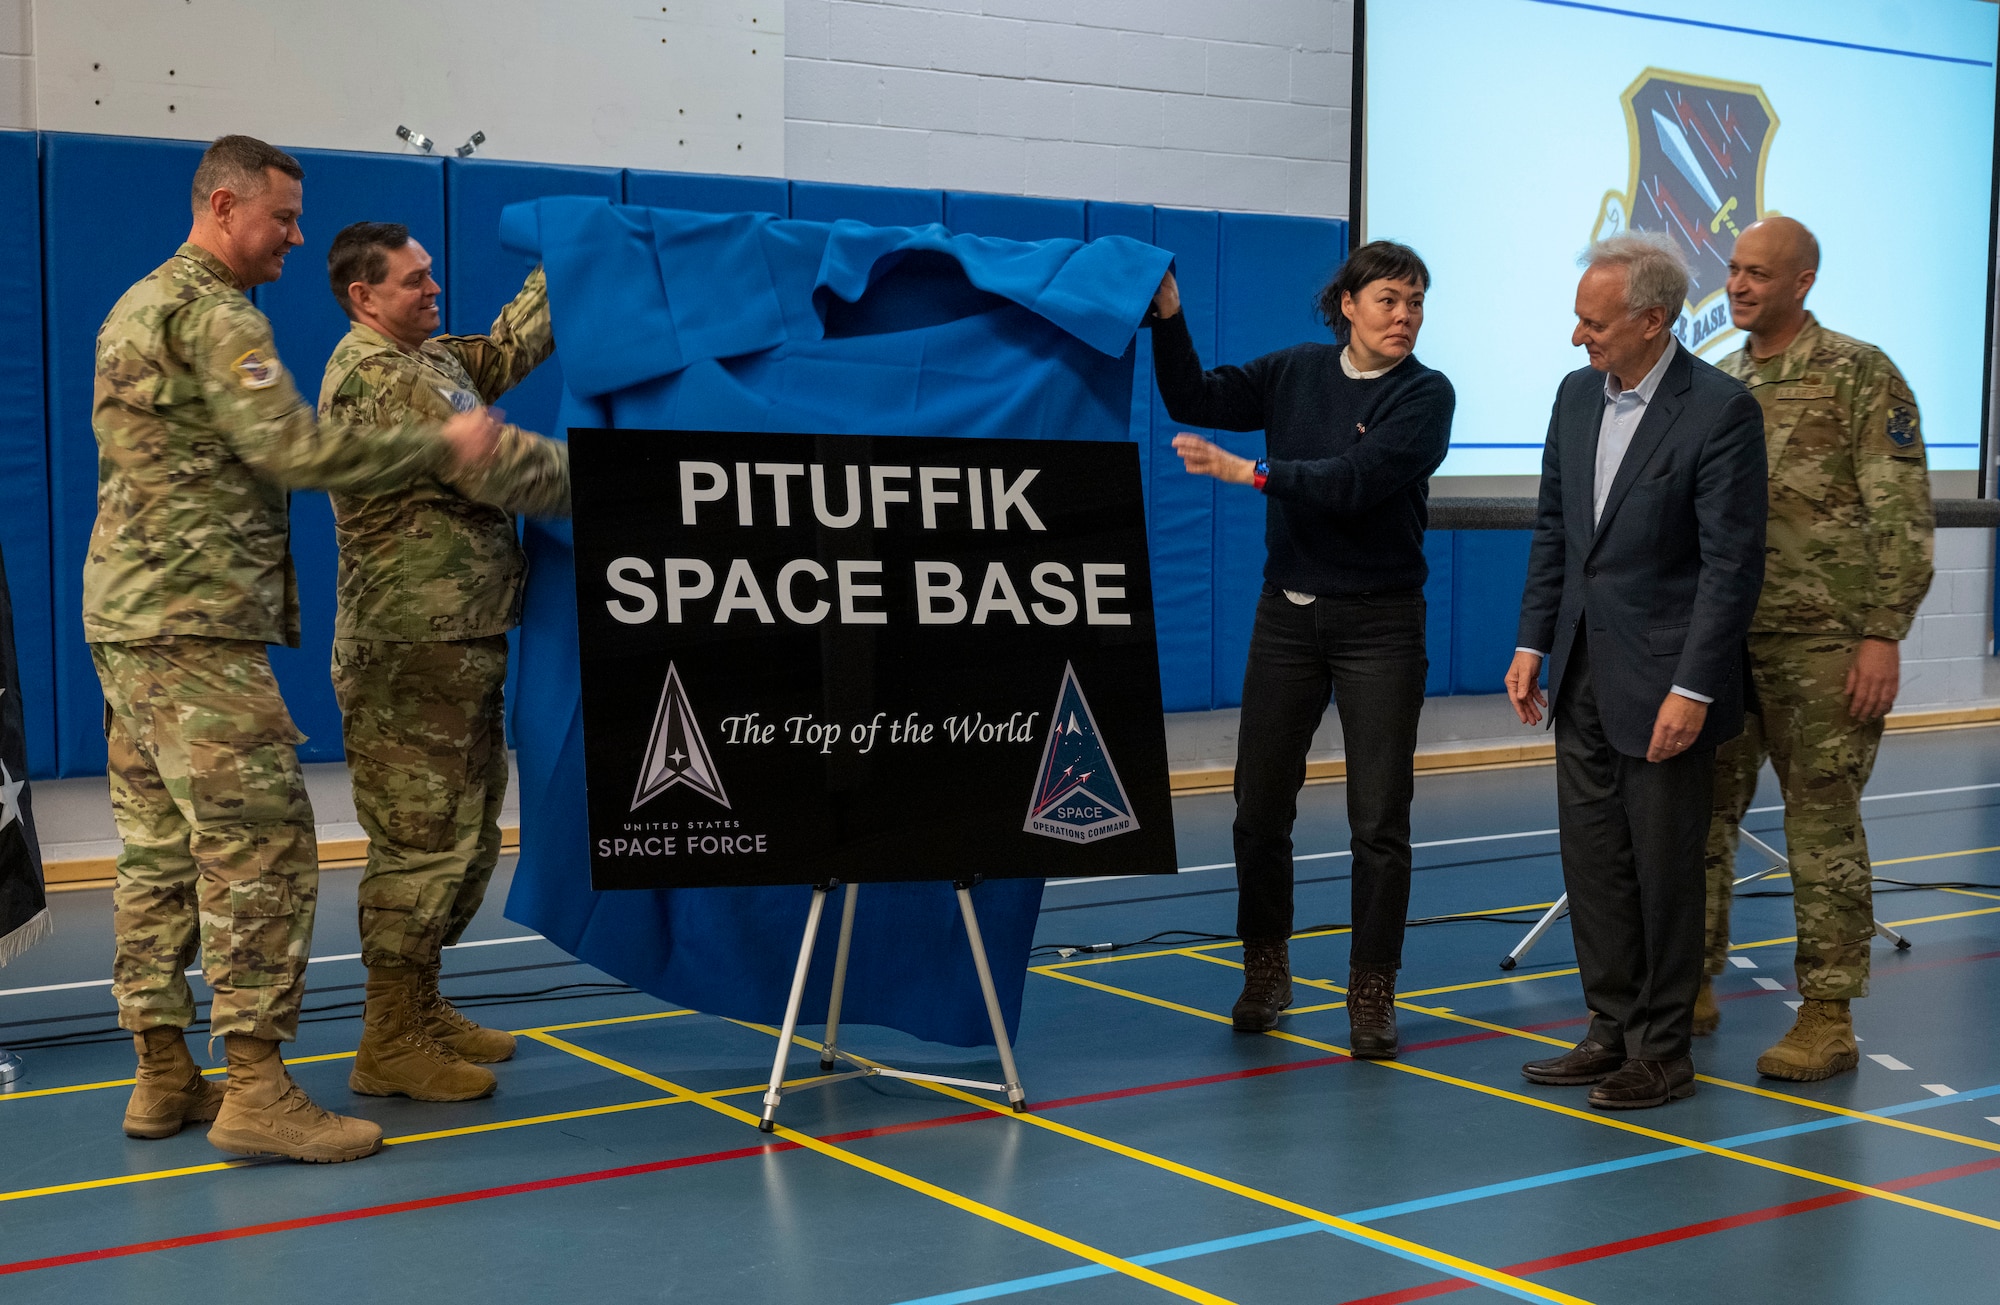 From left to right, Col. Brian Capps, 821st Space Base Group commander, Chief of Space Operations U.S. Space Force Gen. Chance Saltzman, Greenlandic Minister Affairs, Business and Trade Vivian Motzfeldt, U.S. Ambassador to the Kingdom of Denmark Alan Leventhal and Chief Master Sgt. Christopher Clark, 821st Space Group command chief, unveil the new base sign during the base renaming ceremony, at Pituffik Space Base, Greenland, April 6, 2023. The ceremony took place in the fitness center where distinguished guests and Greenlandic community members attended the historic event. (U.S. Space Force photo by Senior Airman Kaitlin Castillo)